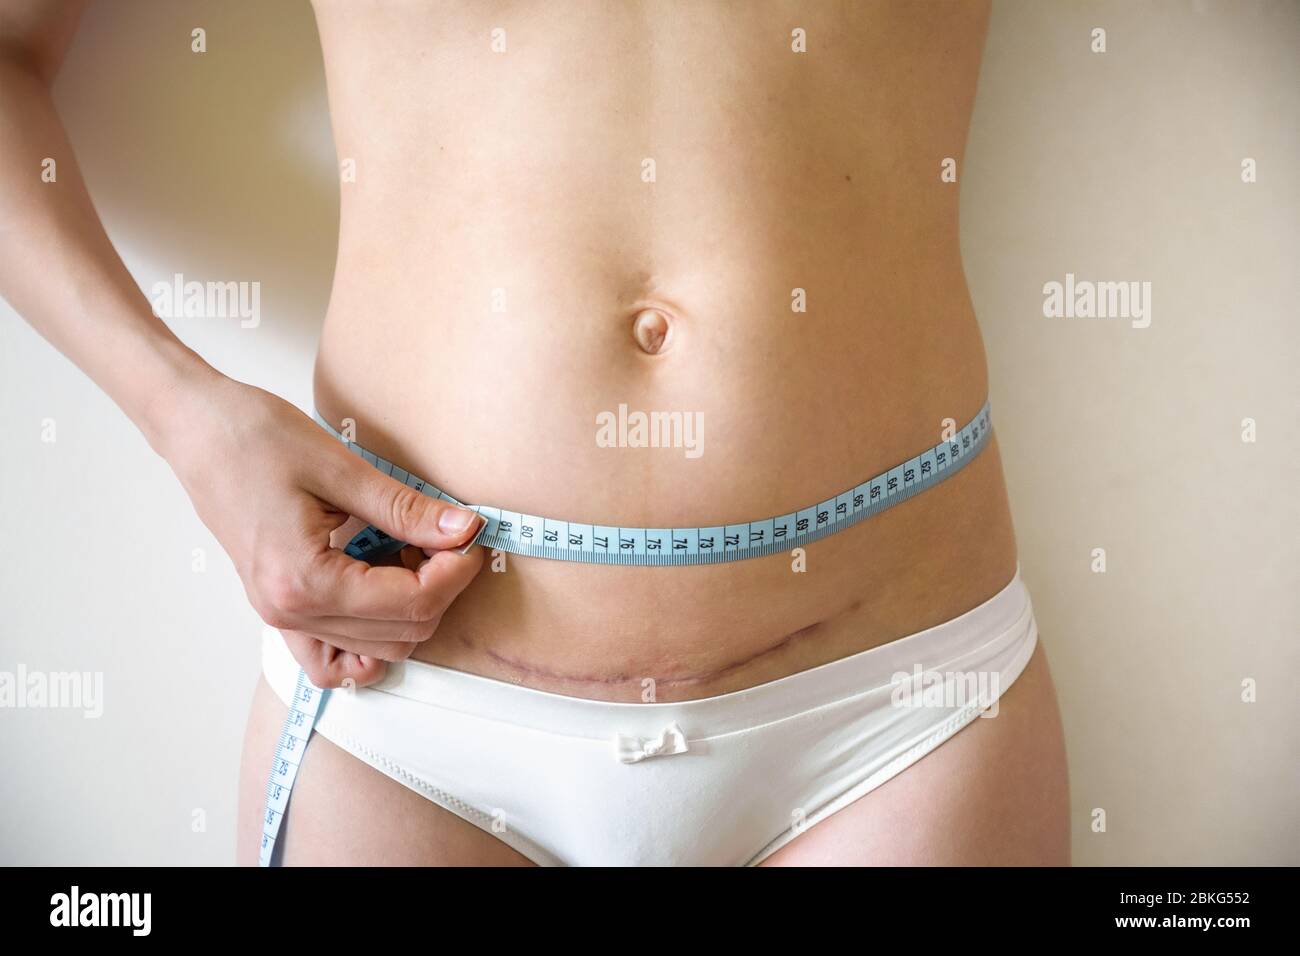 Woman with cesarean section postpartum scar measuring waist after childbirth Stock Photo